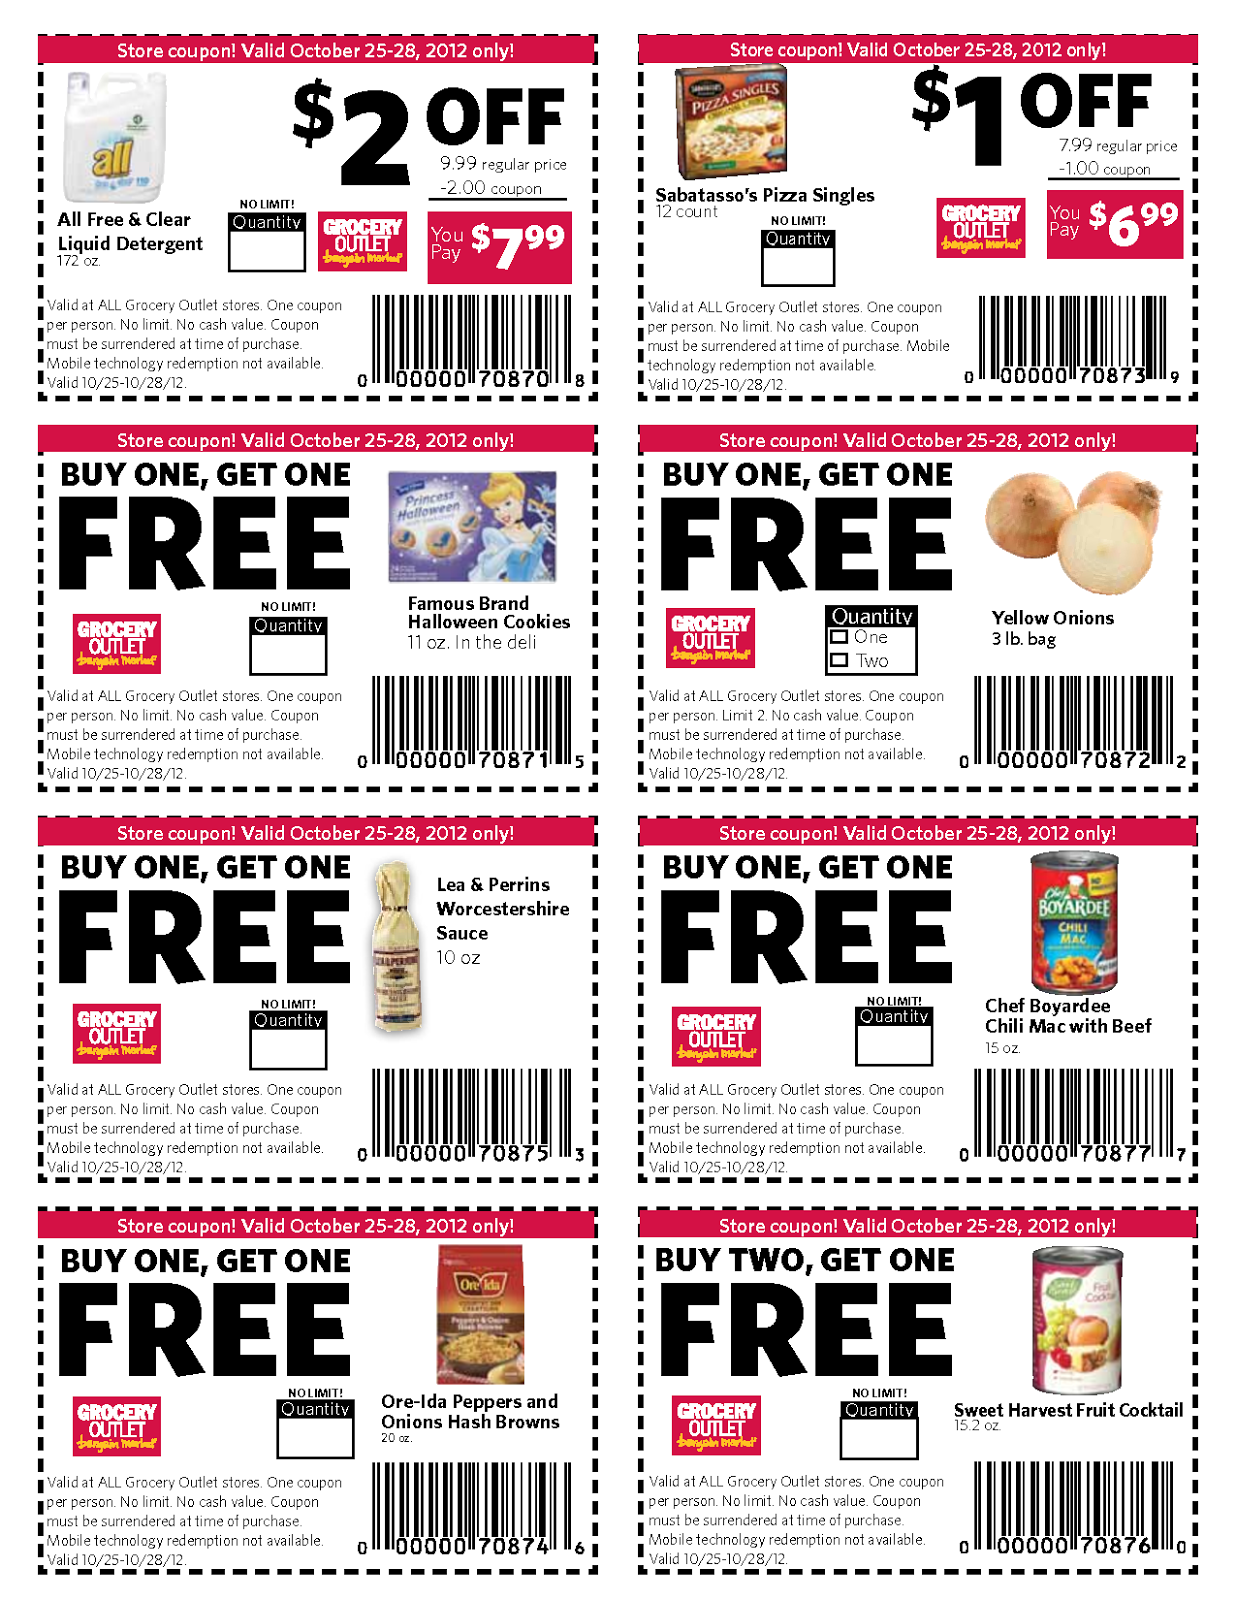 Free Online Coupons Printable